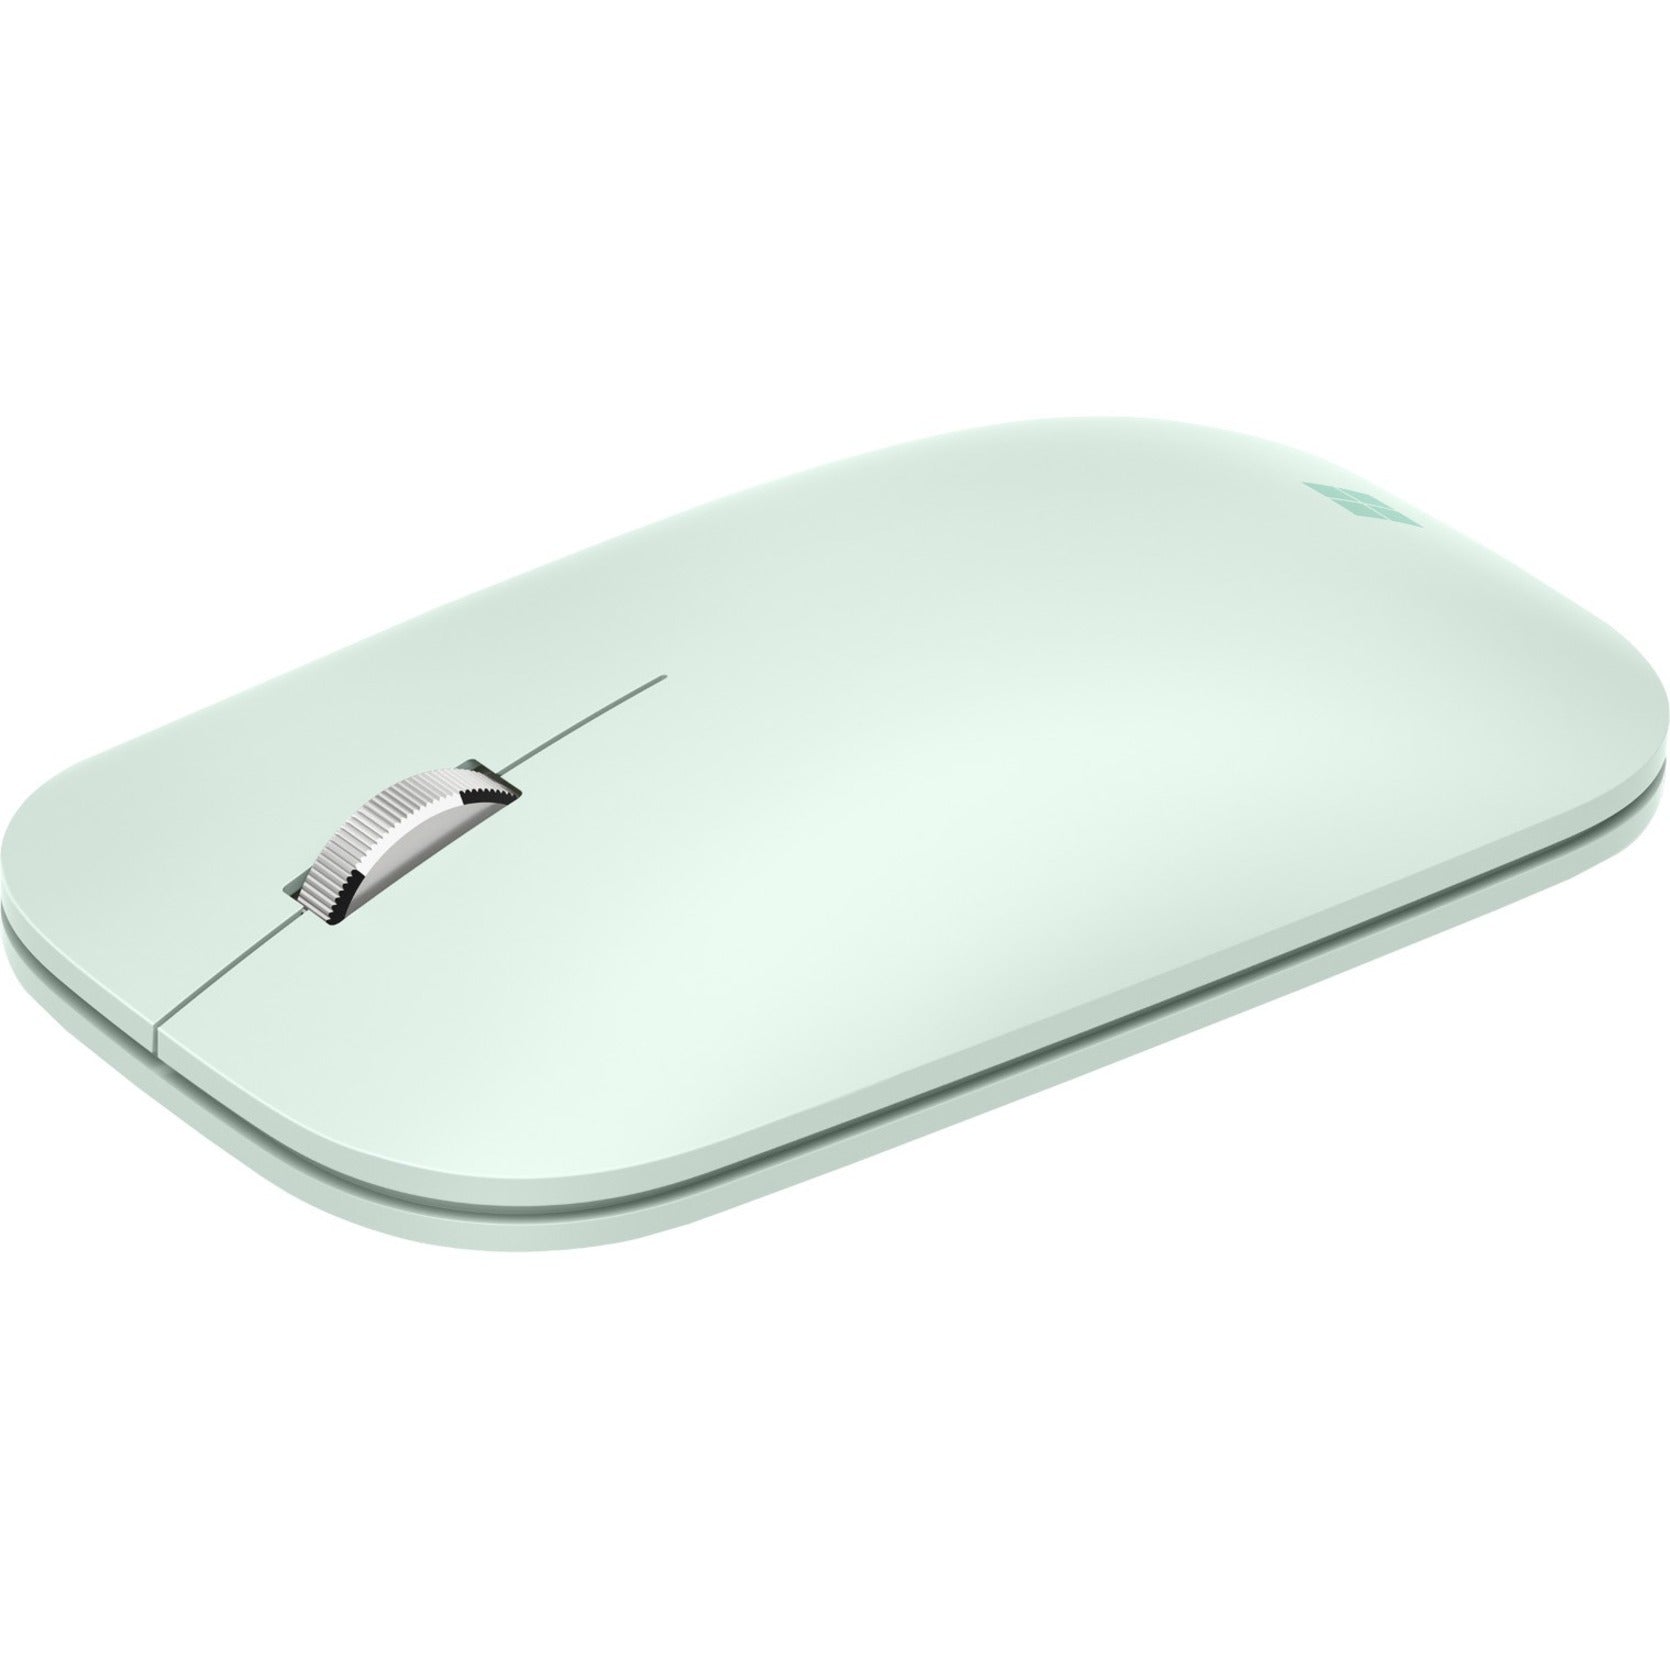 Microsoft Modern Mobile Mouse - Mint [Discontinued]